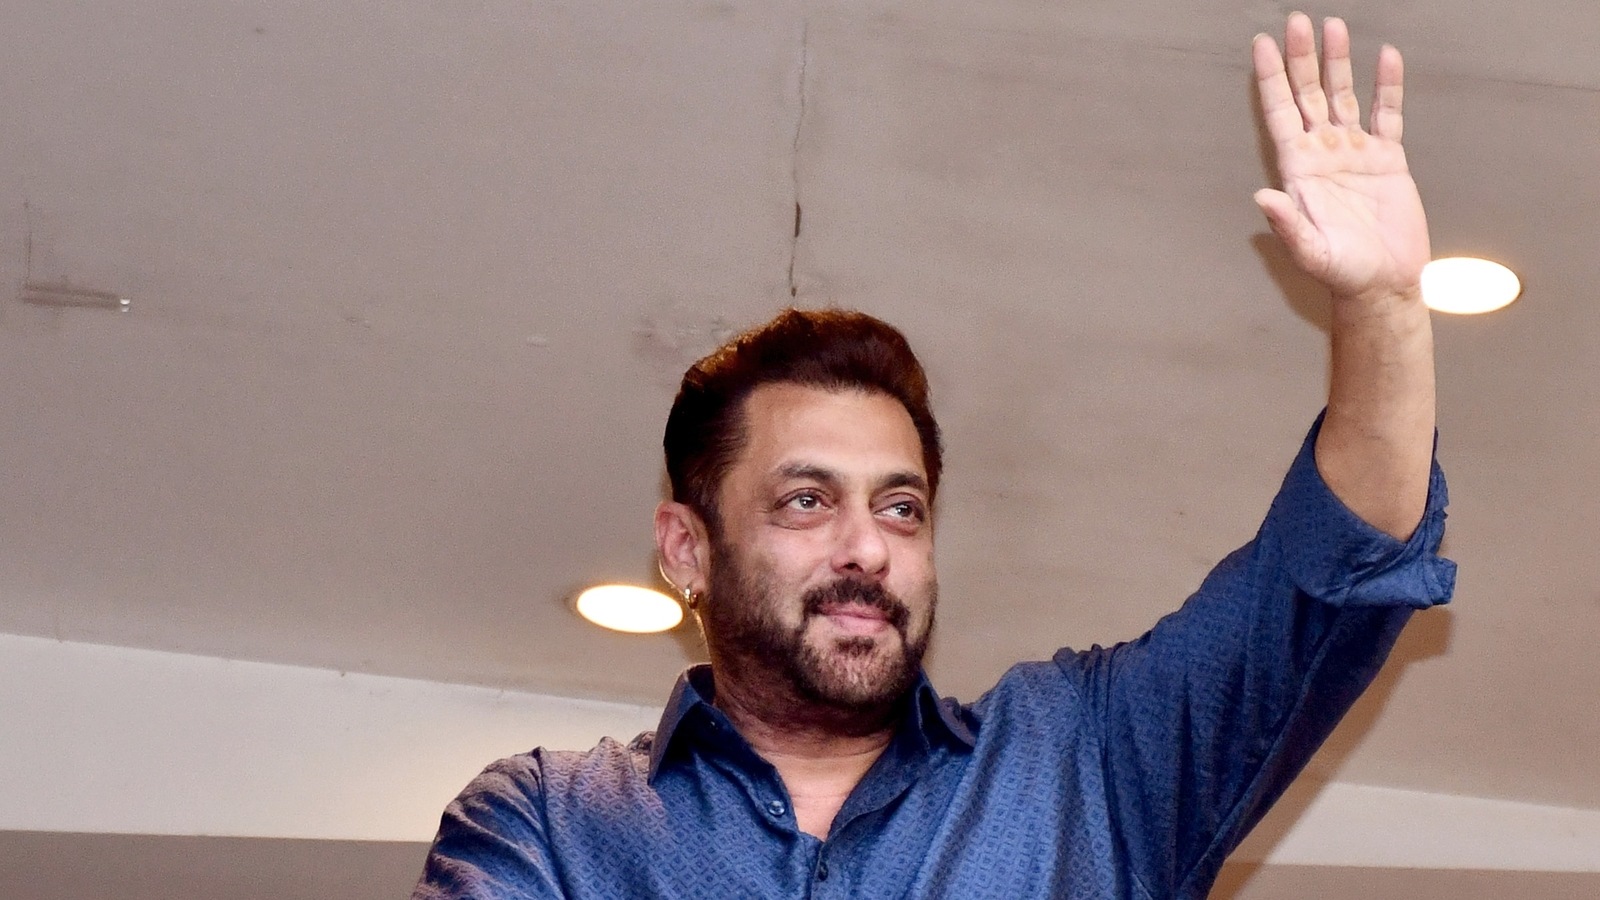 Salman Khan denies getting threats from any person in statement to police